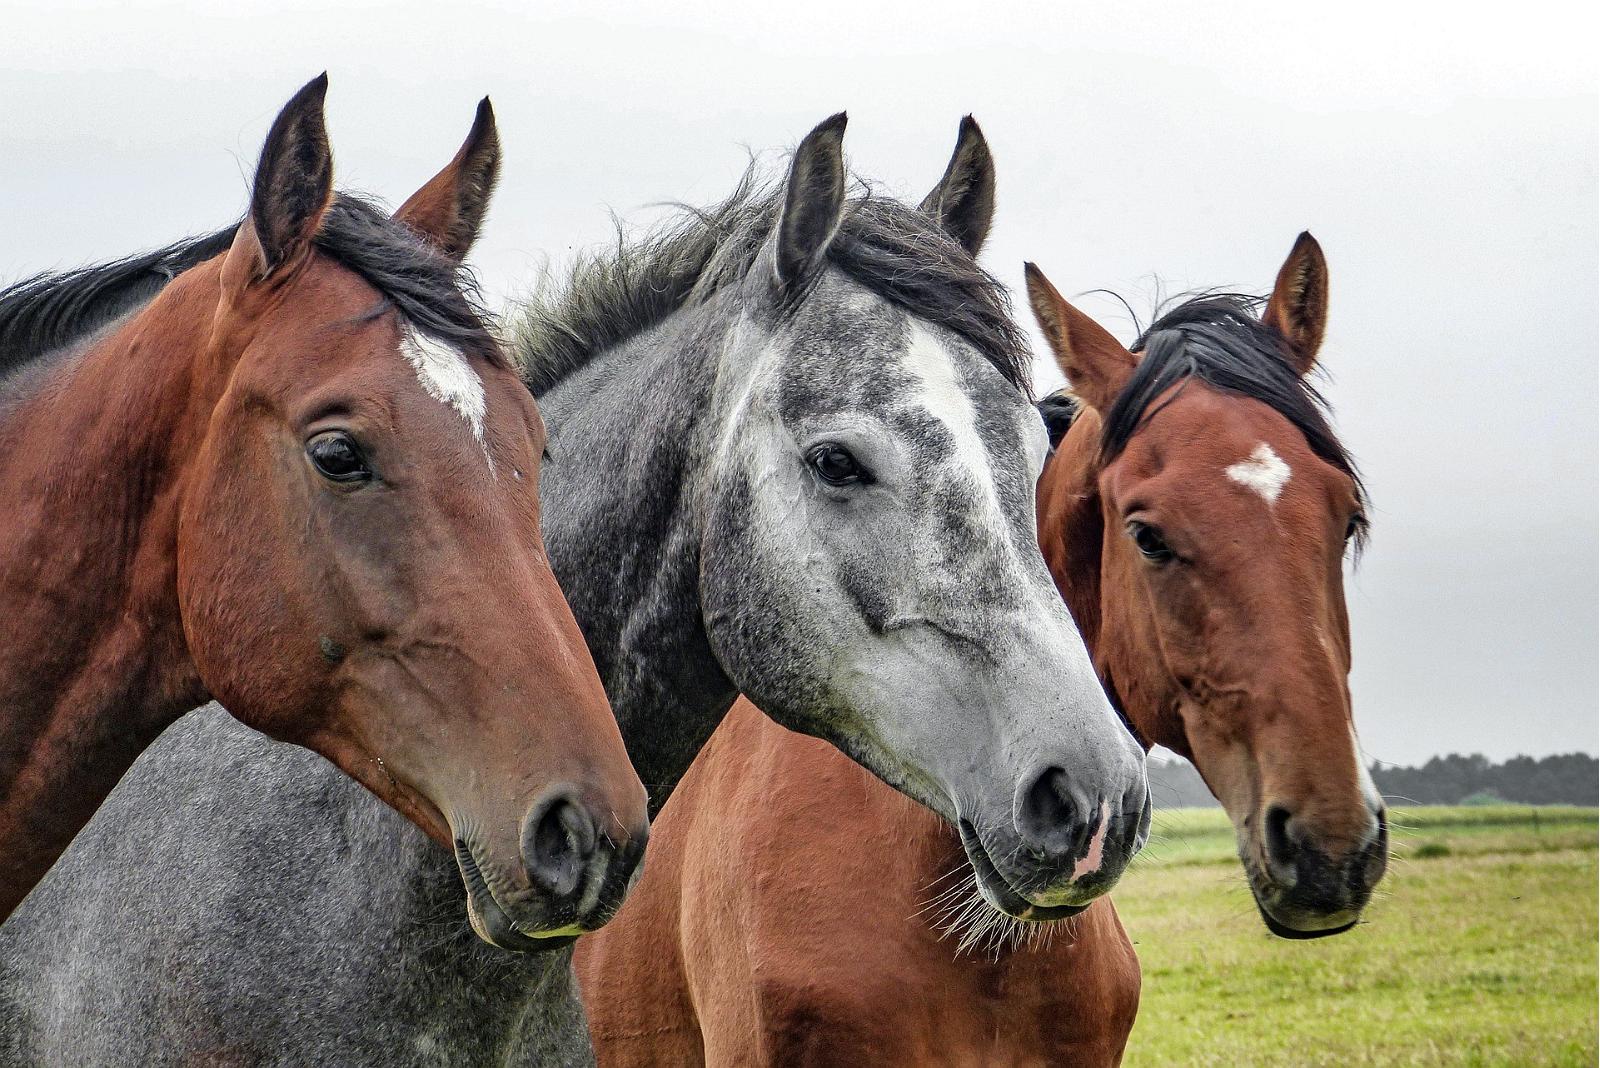 Can You Pass This General Knowledge “True or False” Quiz? horses